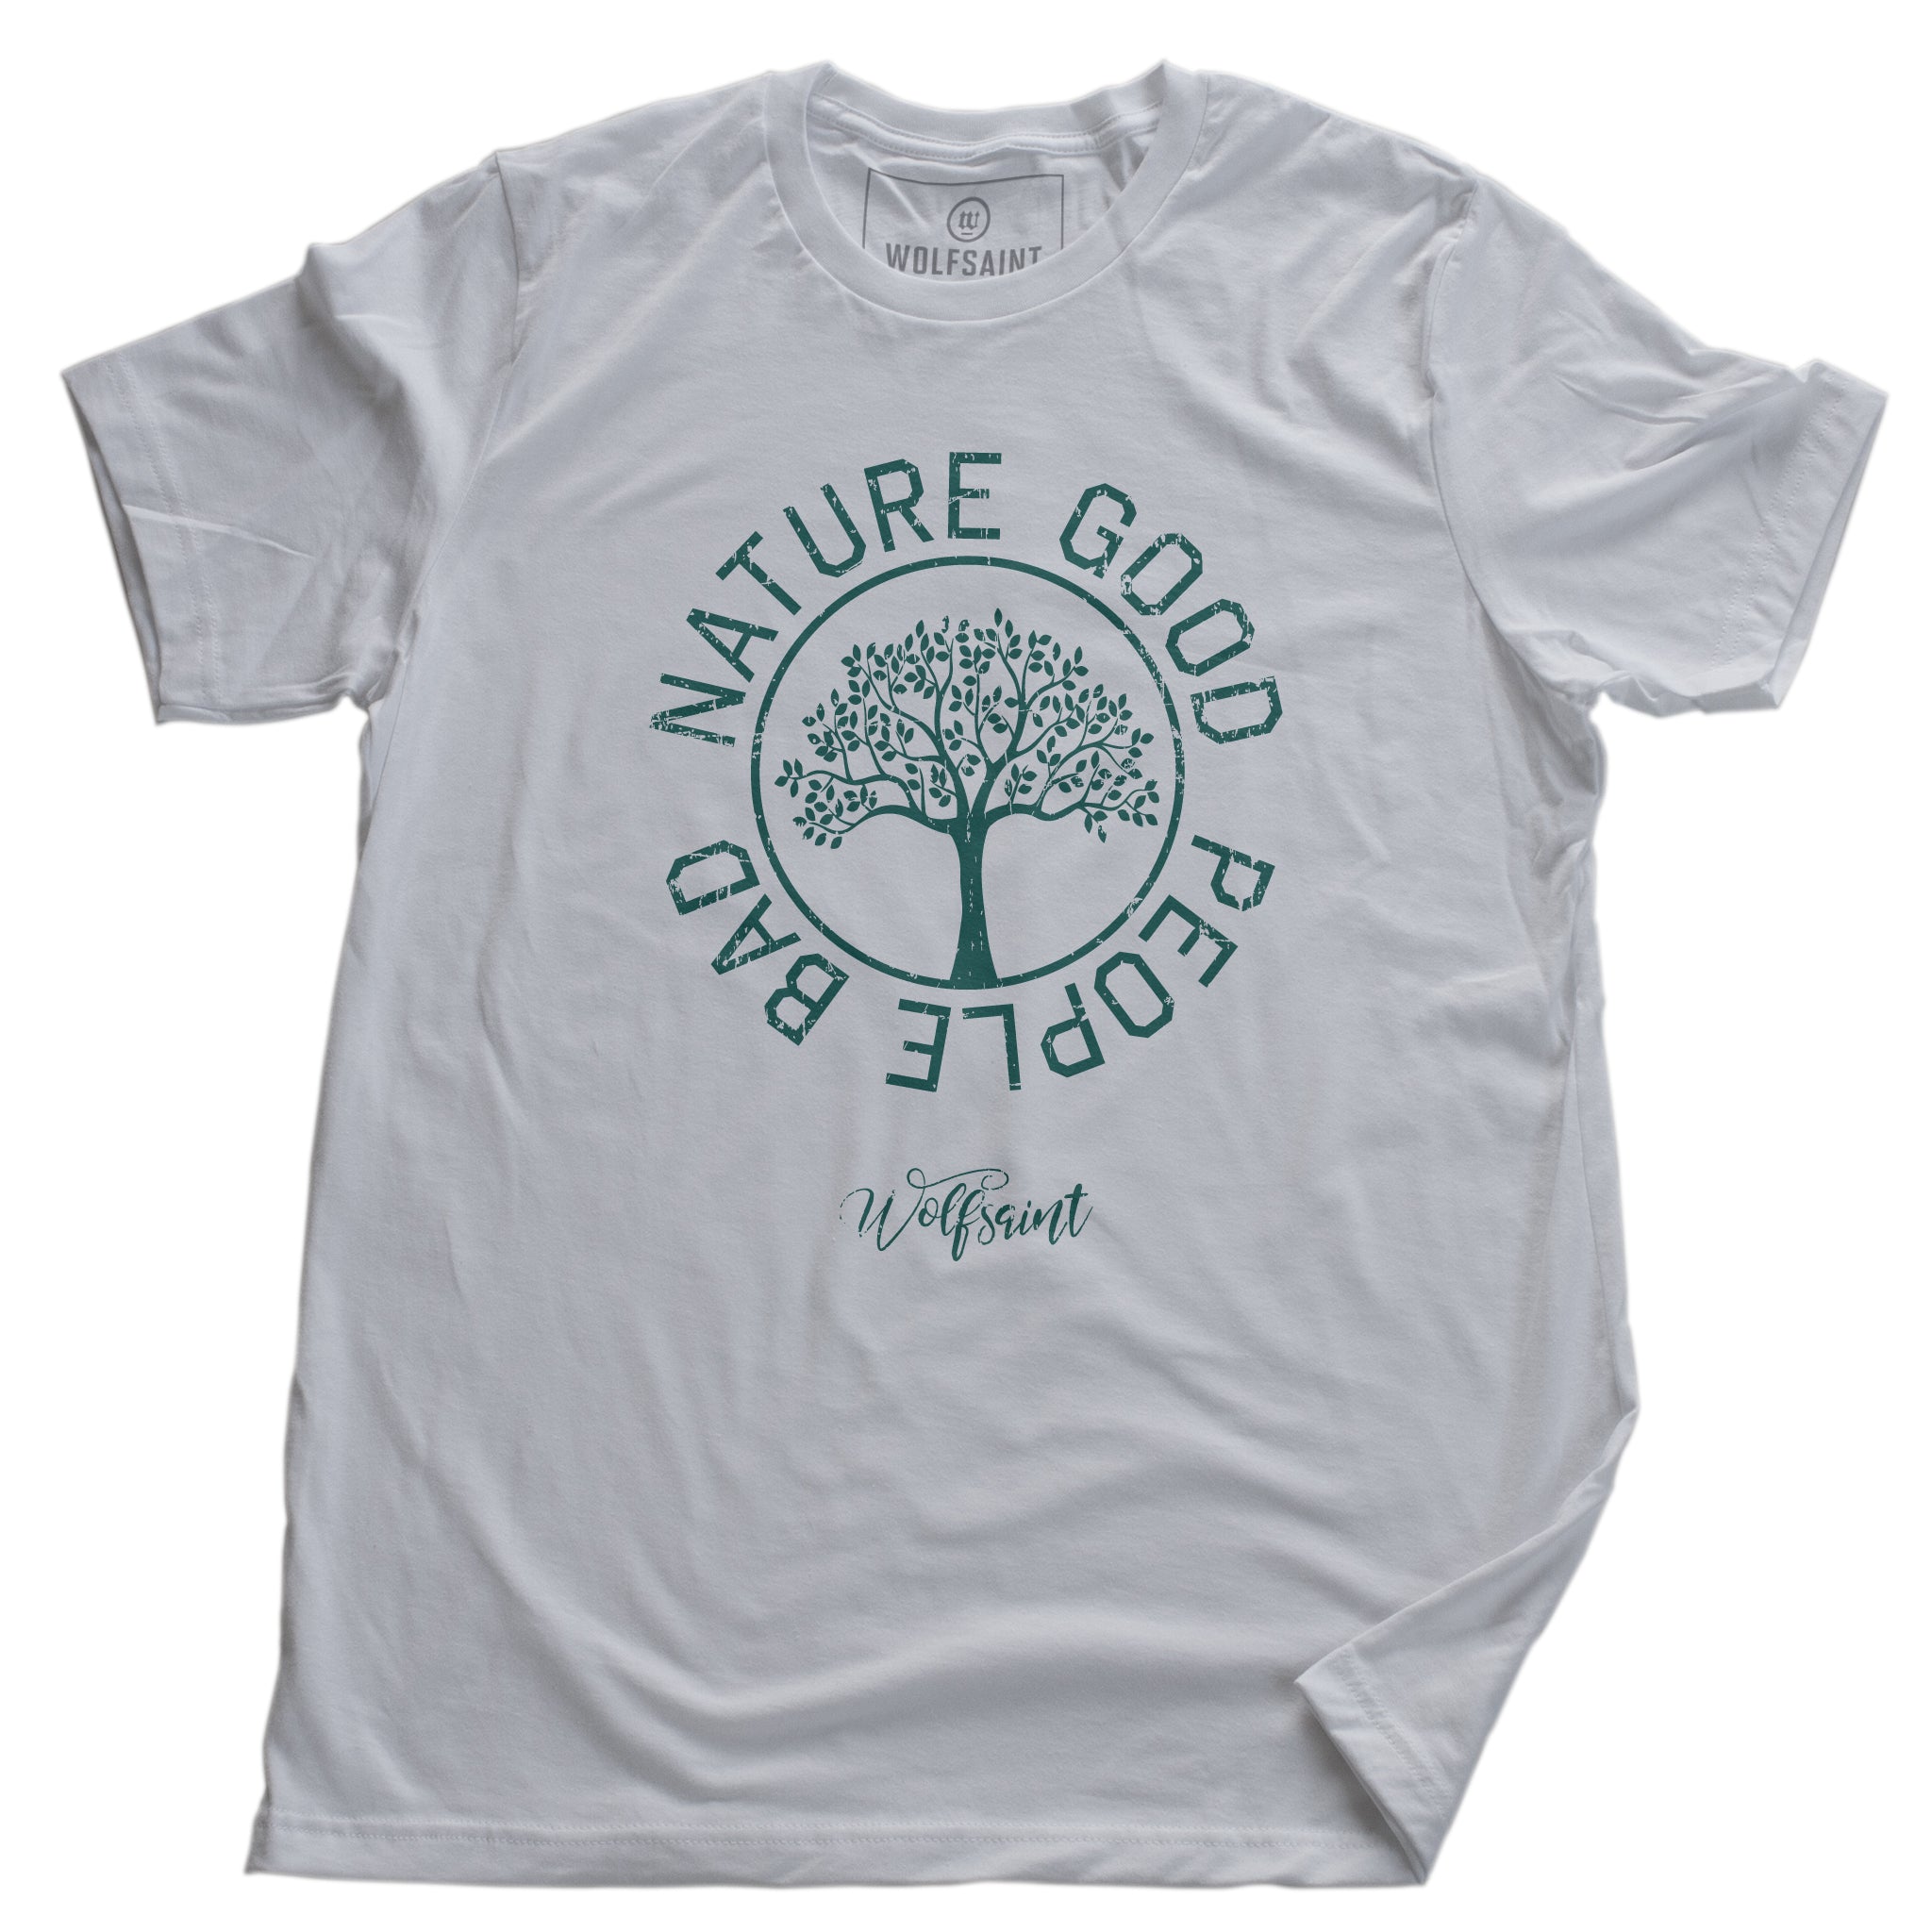 A fashionable vintage-inspired, retro t-shirt in White, featuring a graphic of a thriving tree in a circle, surrounded by the sarcastic text: “NATURE GOOD, PEOPLE BAD” with the Wolfsaint brand script logo beneath. From wolfsaint.net